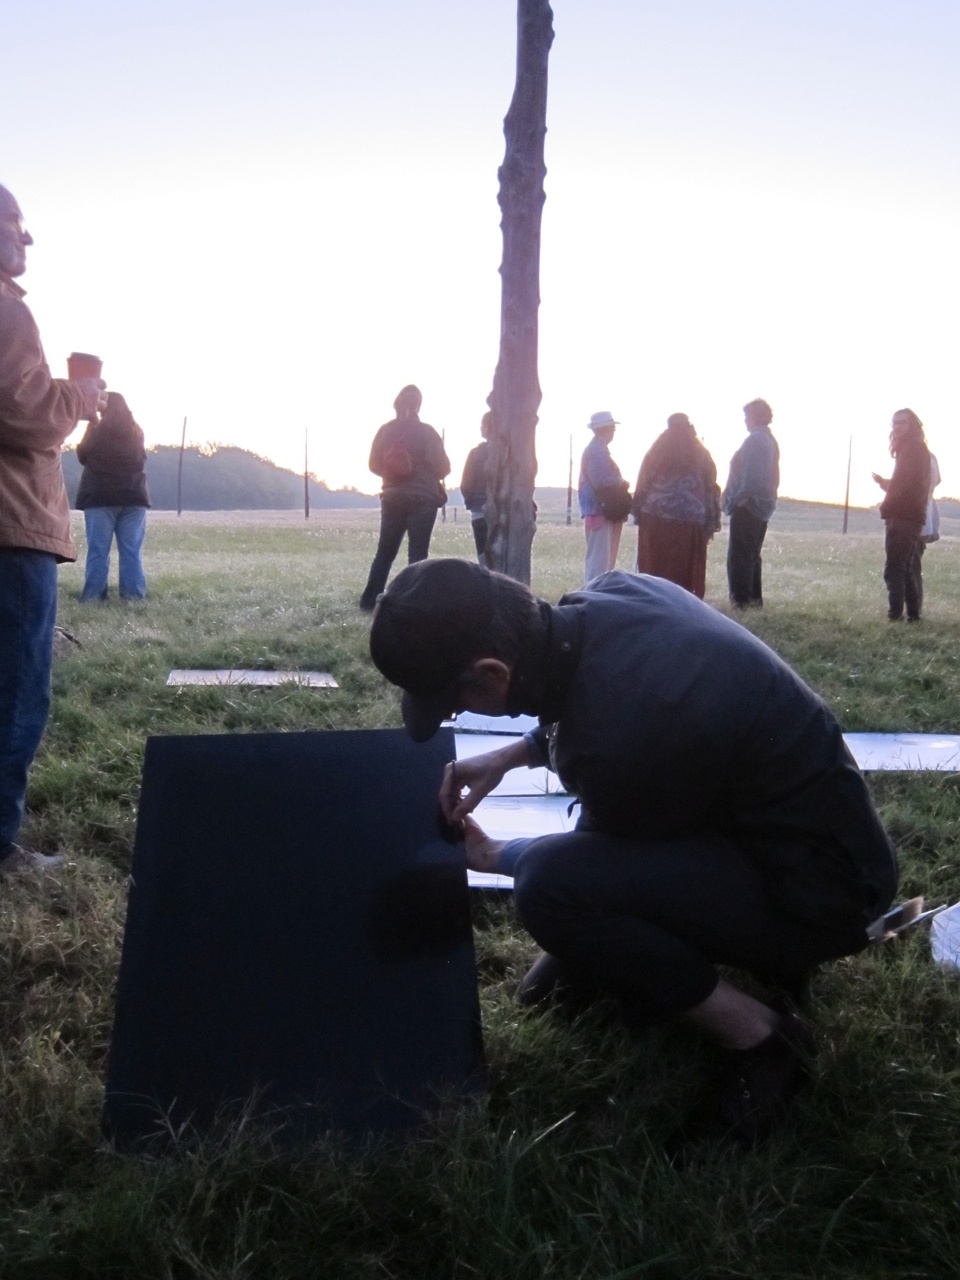 Shaun outdoors hunched over on the ground examining a large square rectangular piece of black plastic